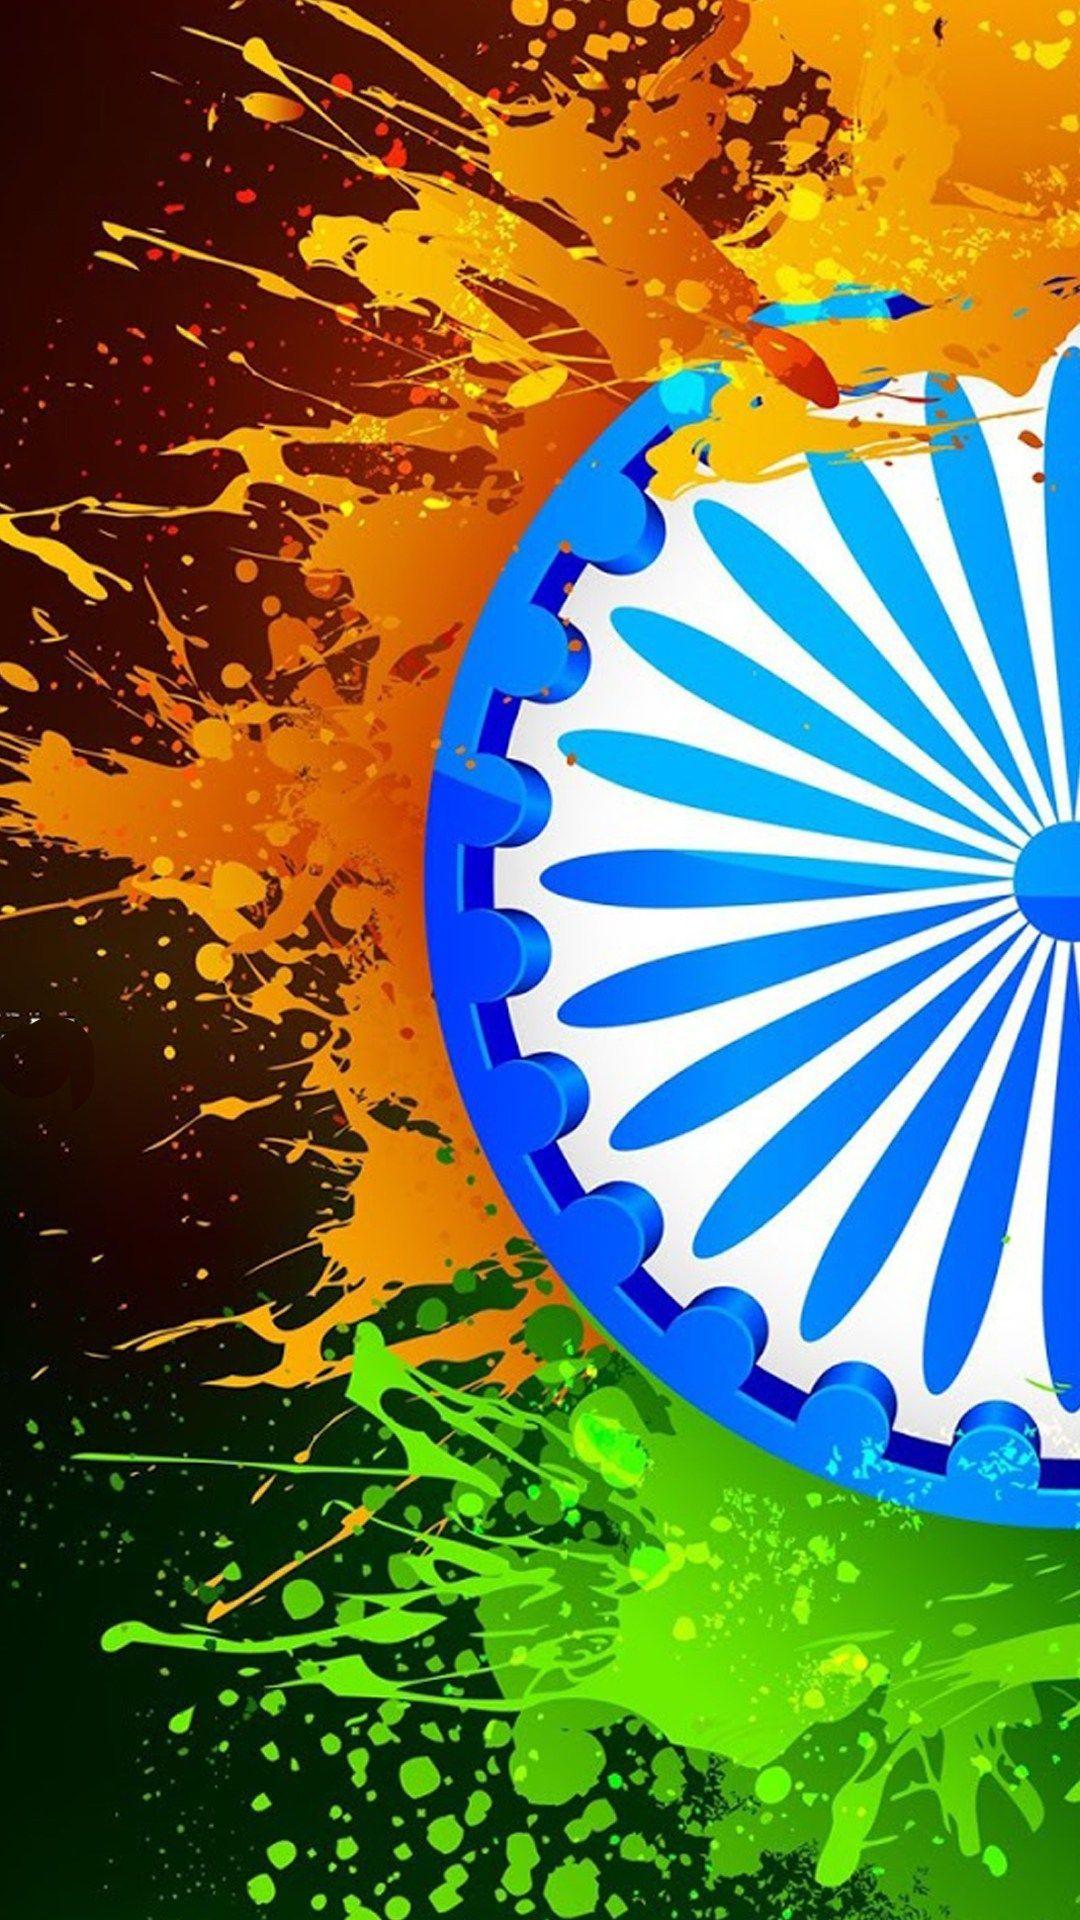 Indian National Flag Wallpapers - Top Free Indian National Flag